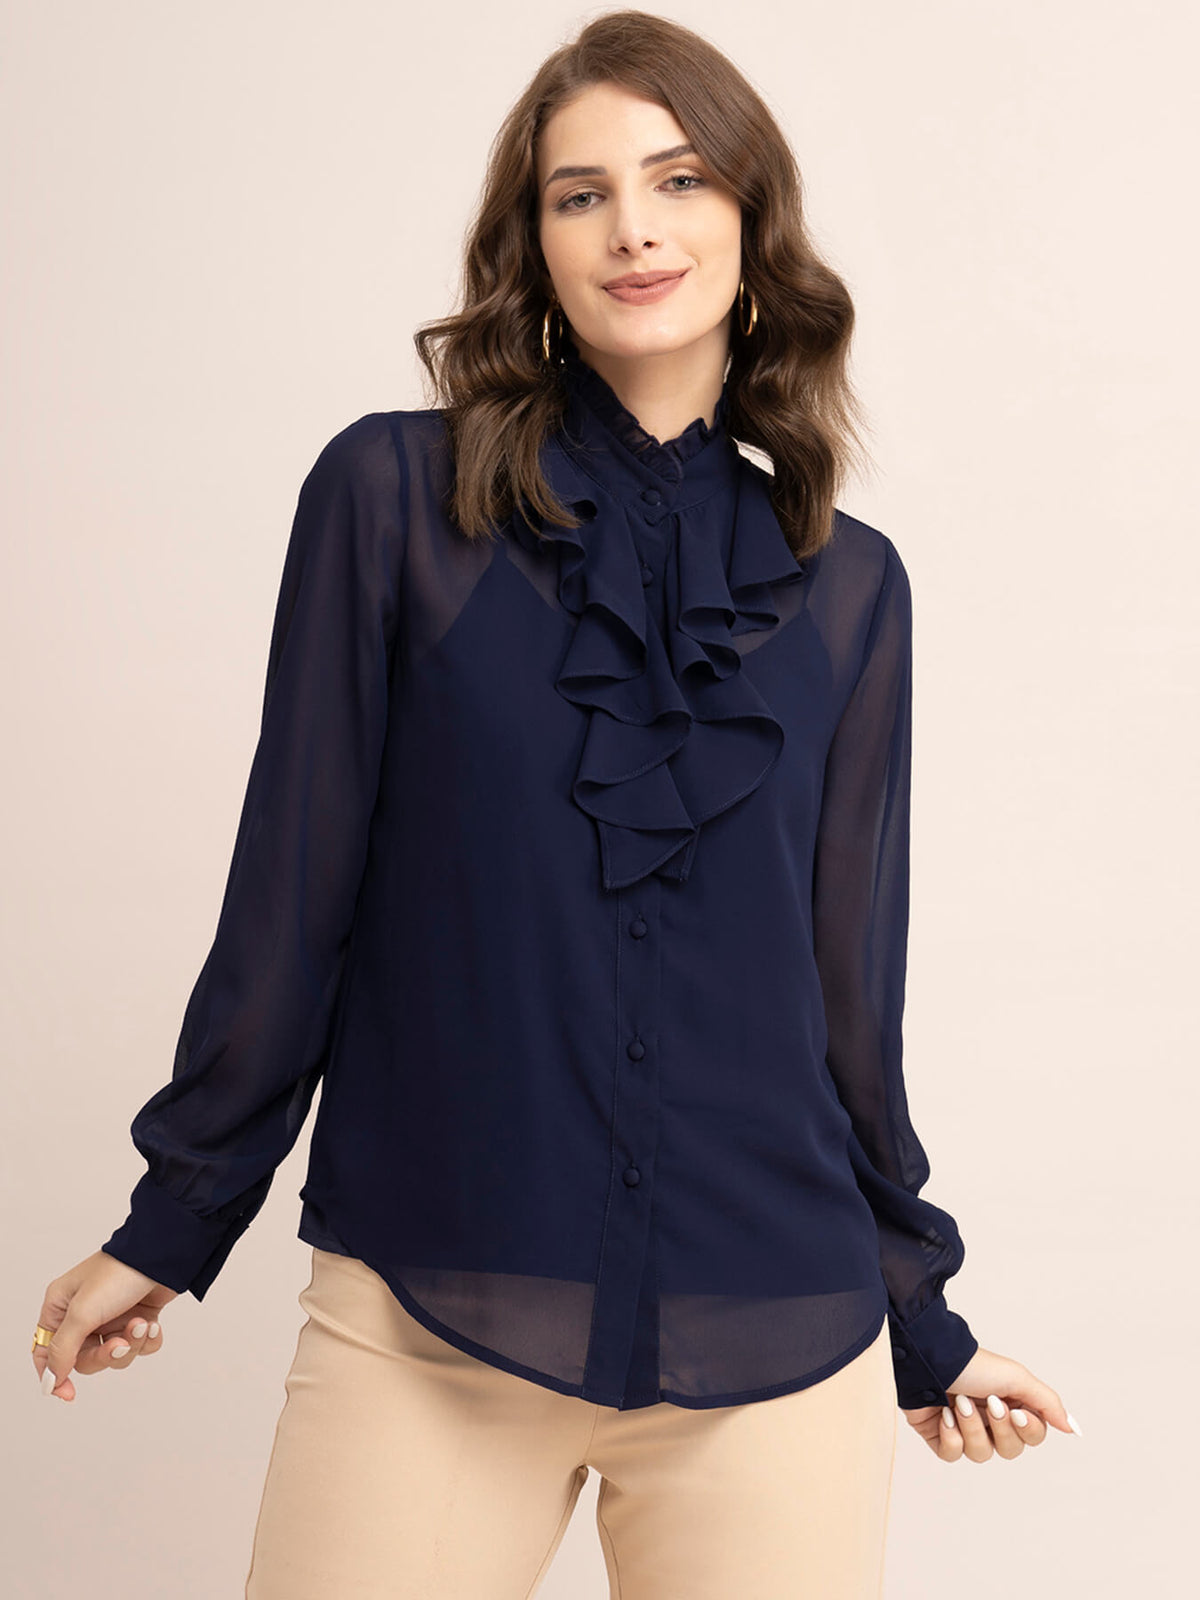 Georgette Solid Ruffle Shirt - Navy Blue| Formal Shirts